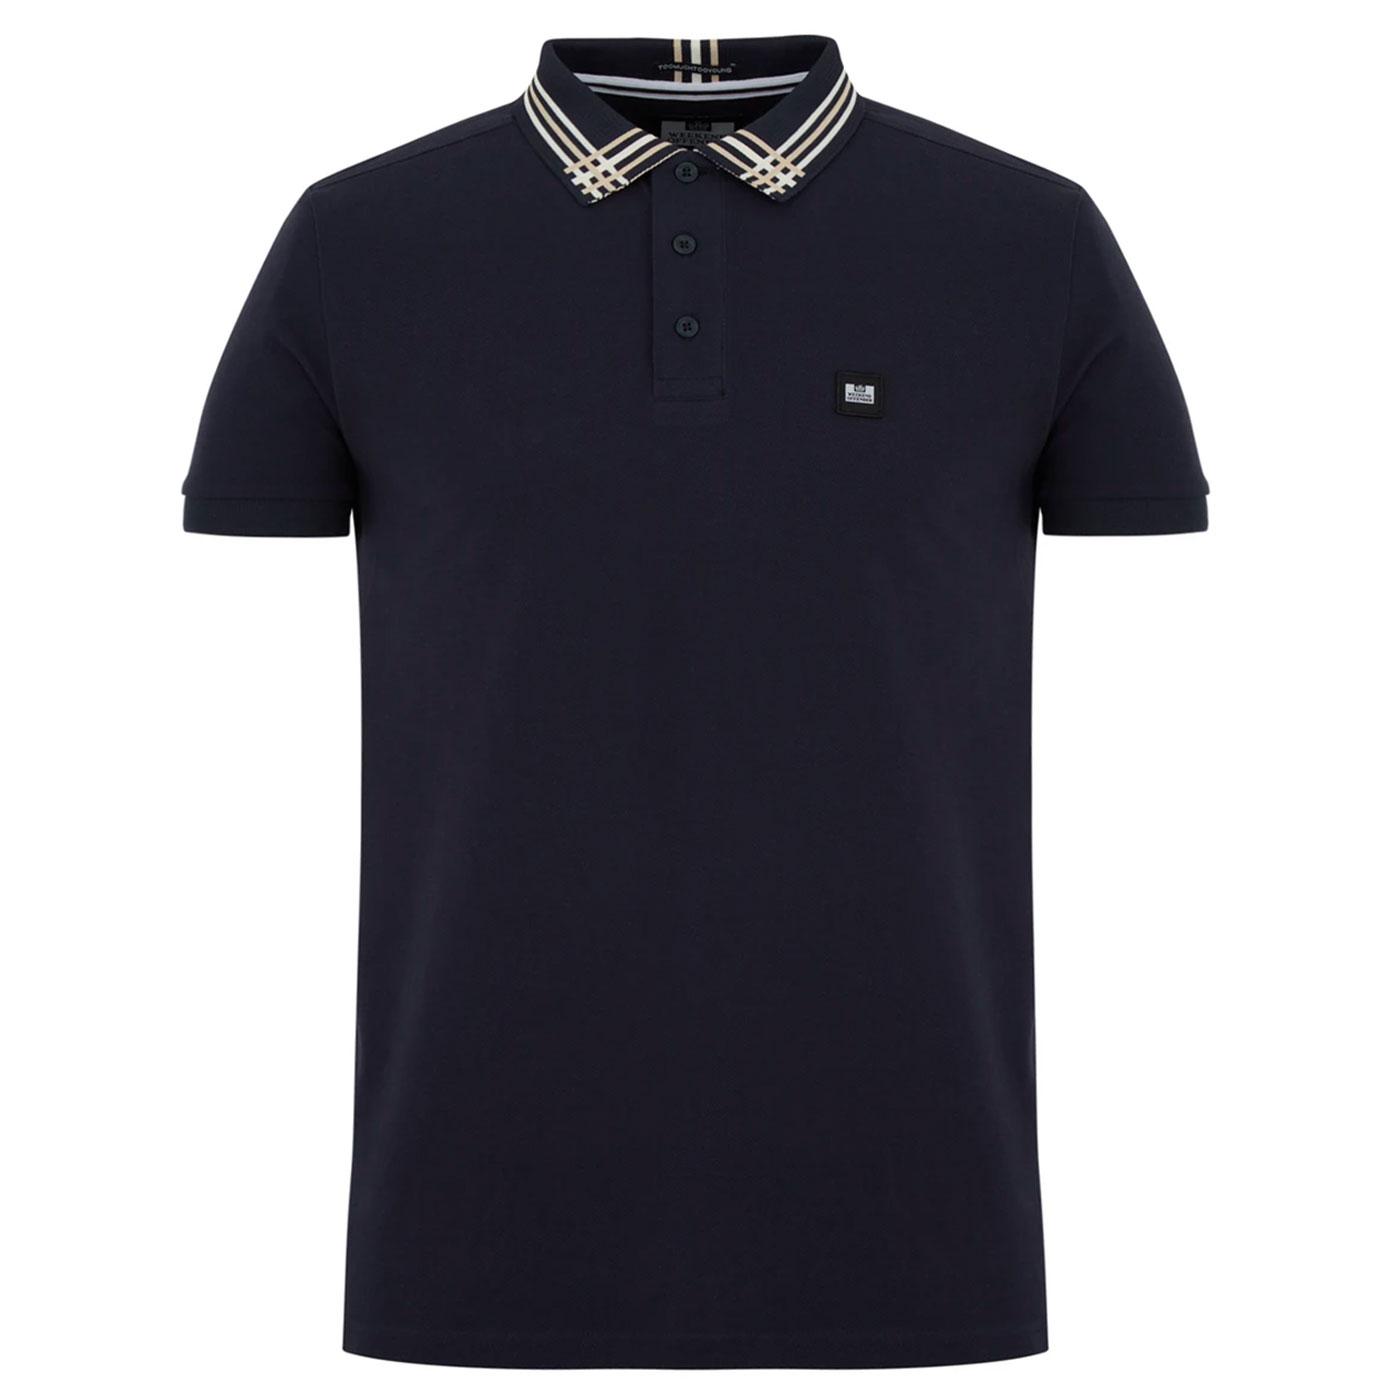 Rivera WEEKEND OFFENDER Mod Tipped Polo Top (N)